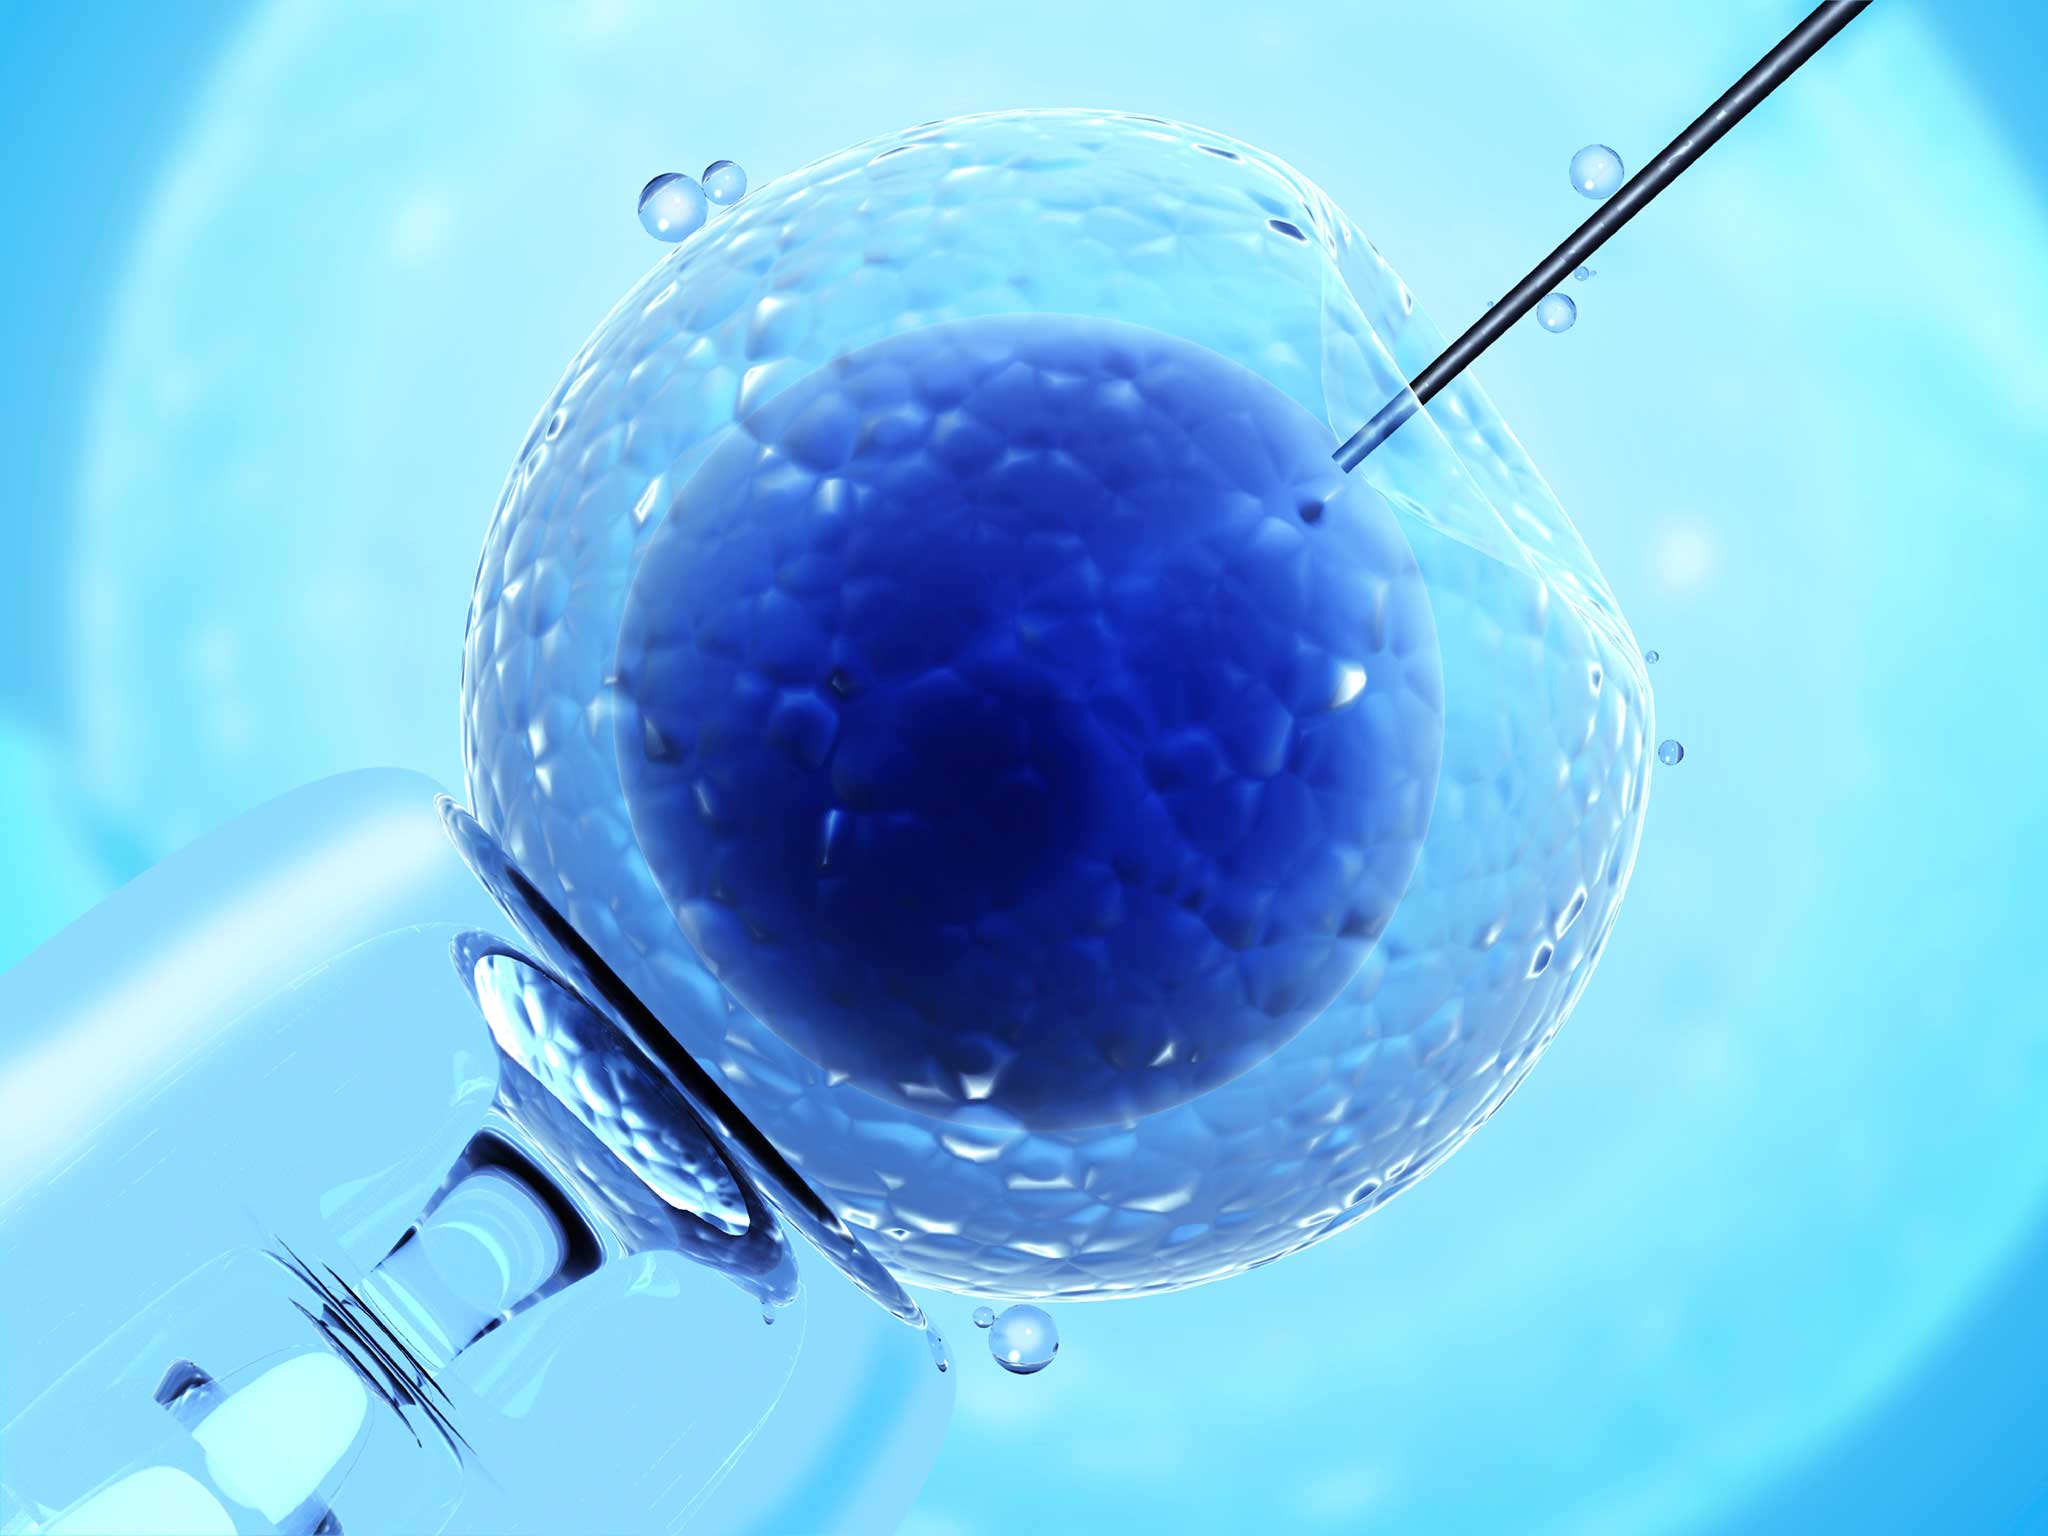 The Human Fertilisation & Embryology Authority is concerned about IVF ‘add-ons’ without evidence they work